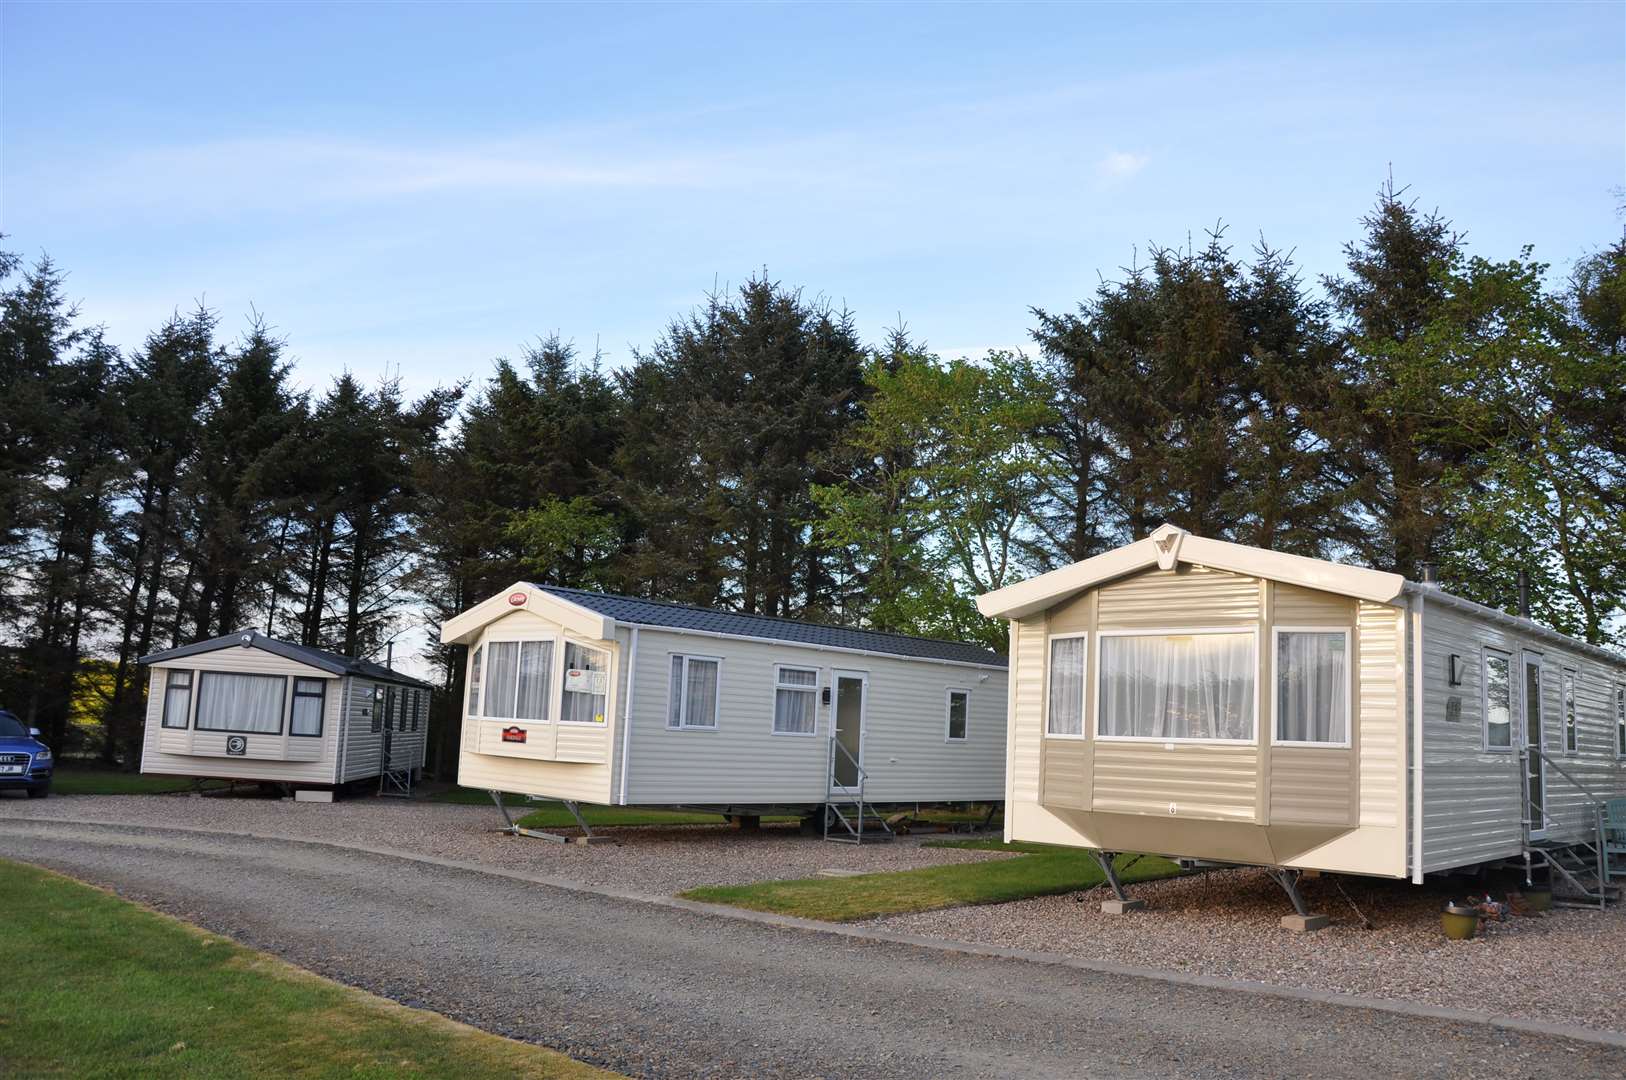 The new fees will affect around 20 residential caravan sites in Highland region.